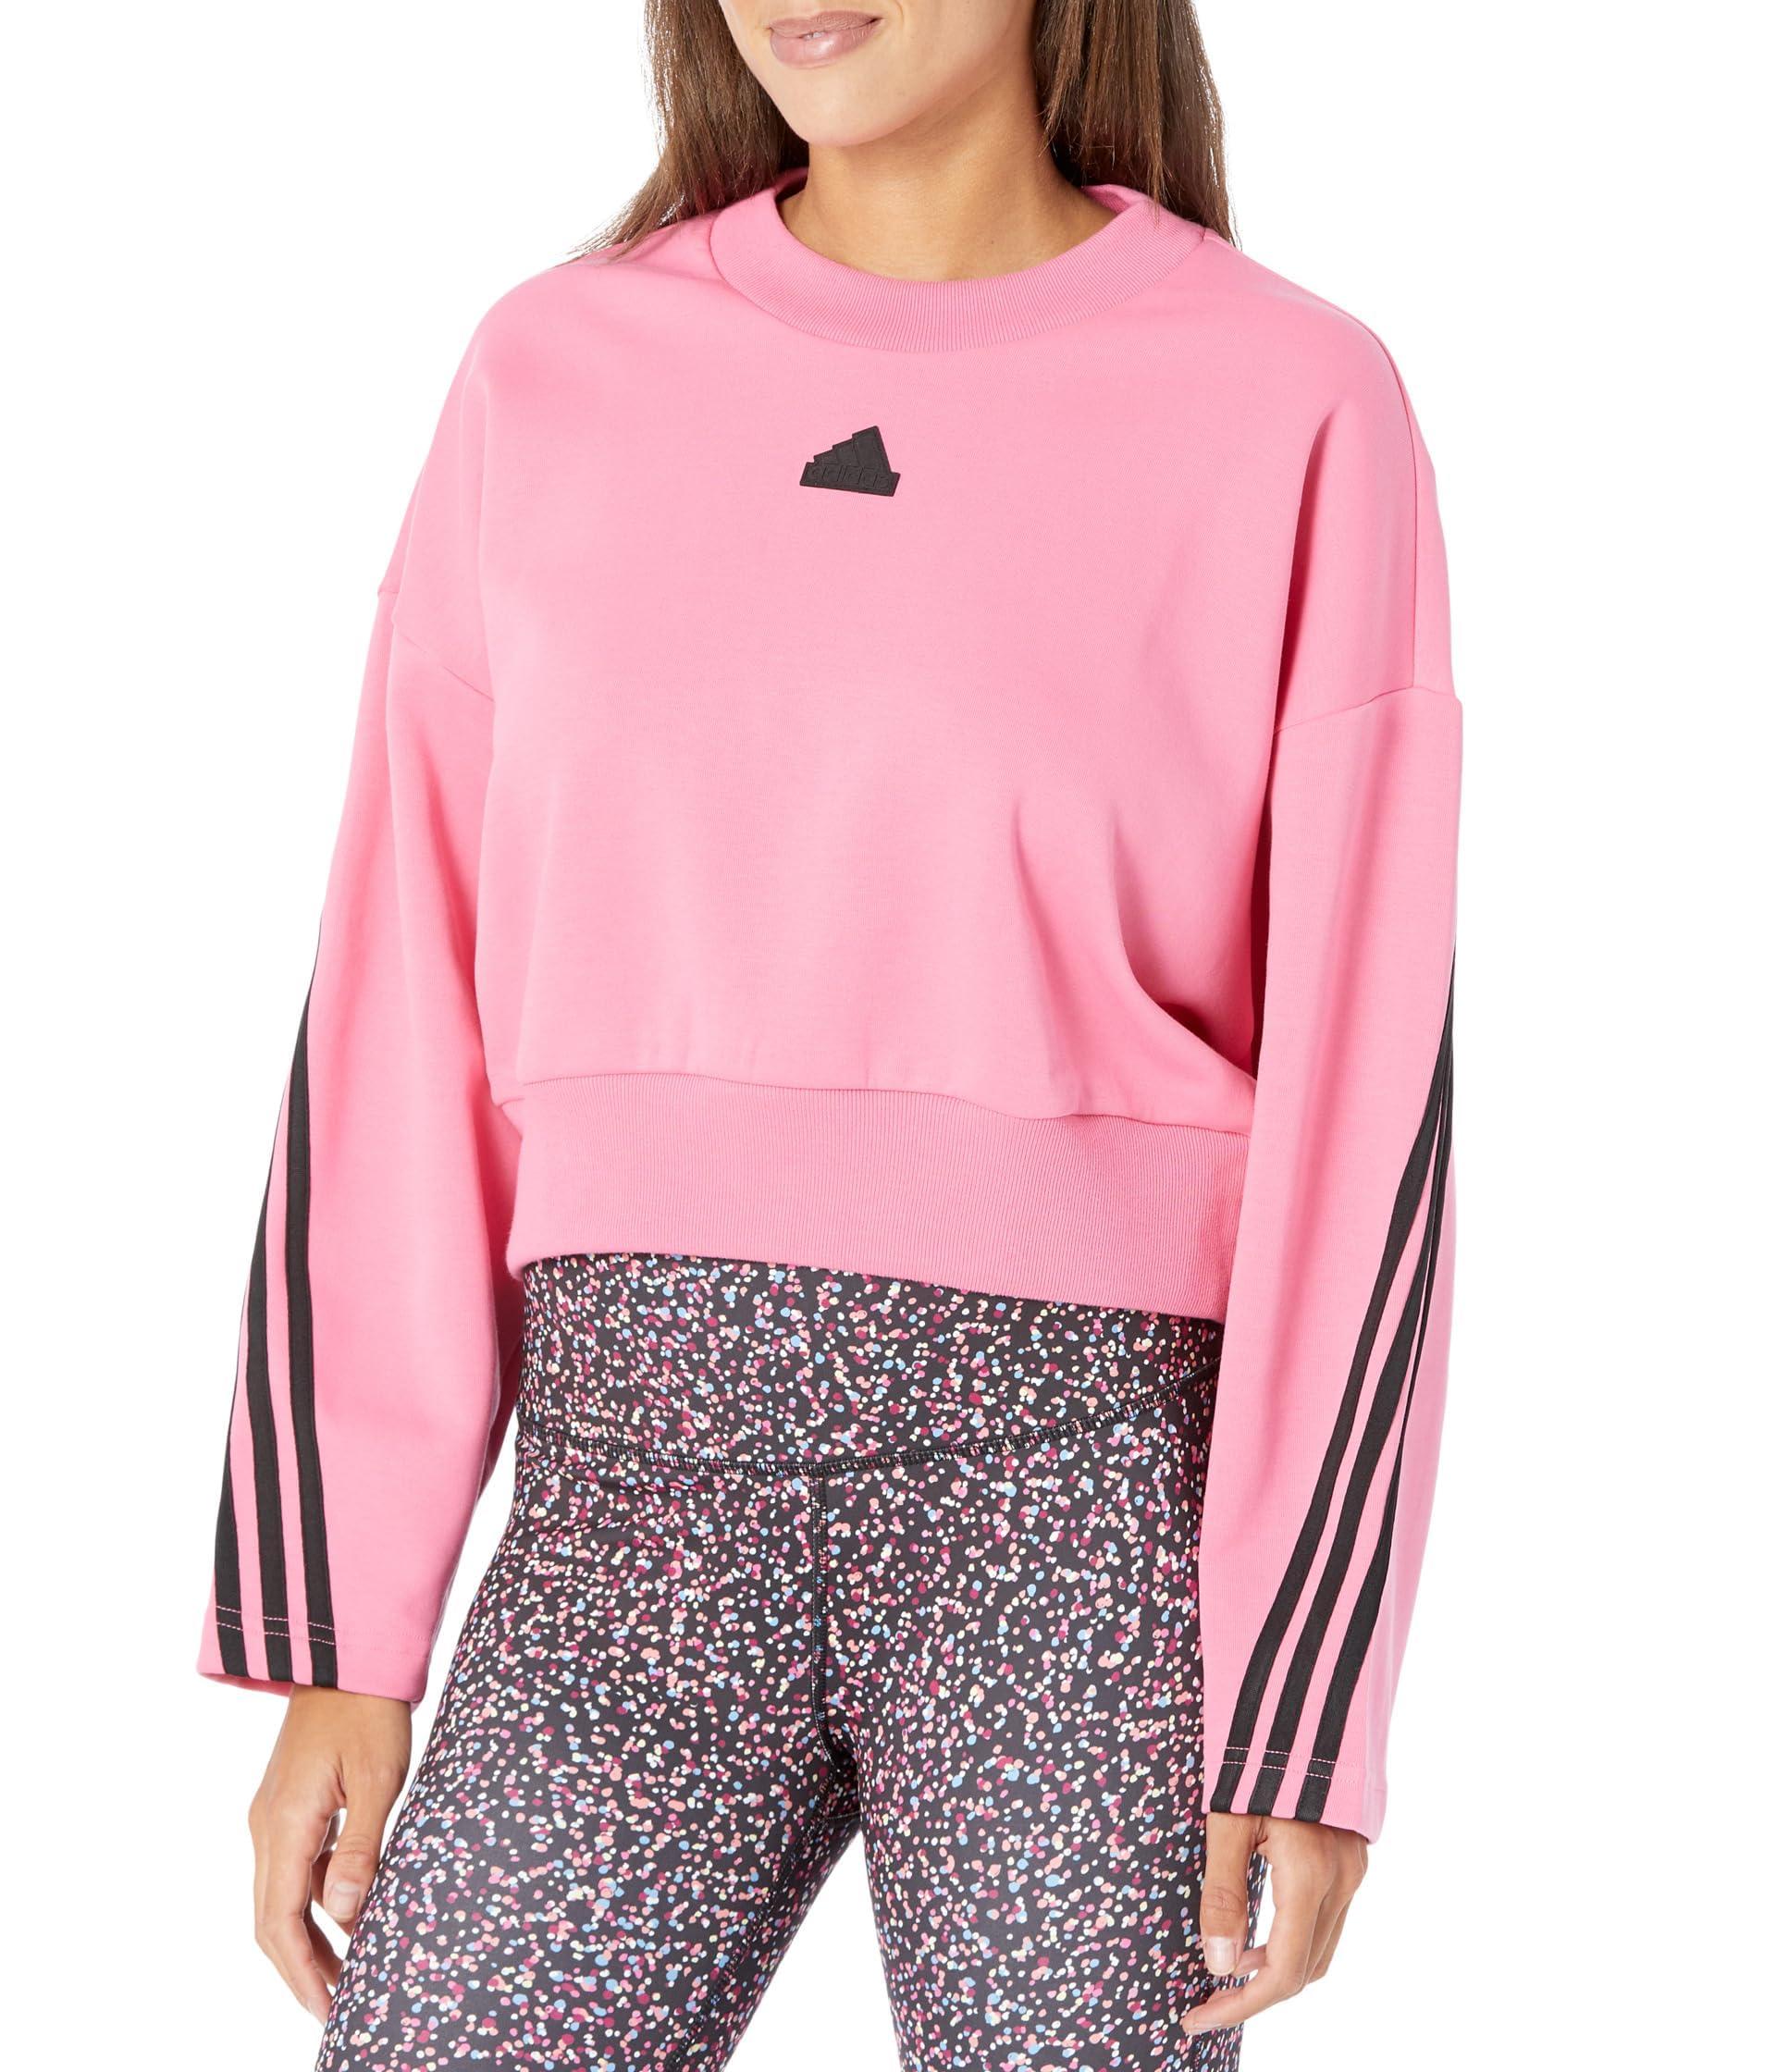 in 3-stripes | adidas Crew Future Lyst Pink Icons